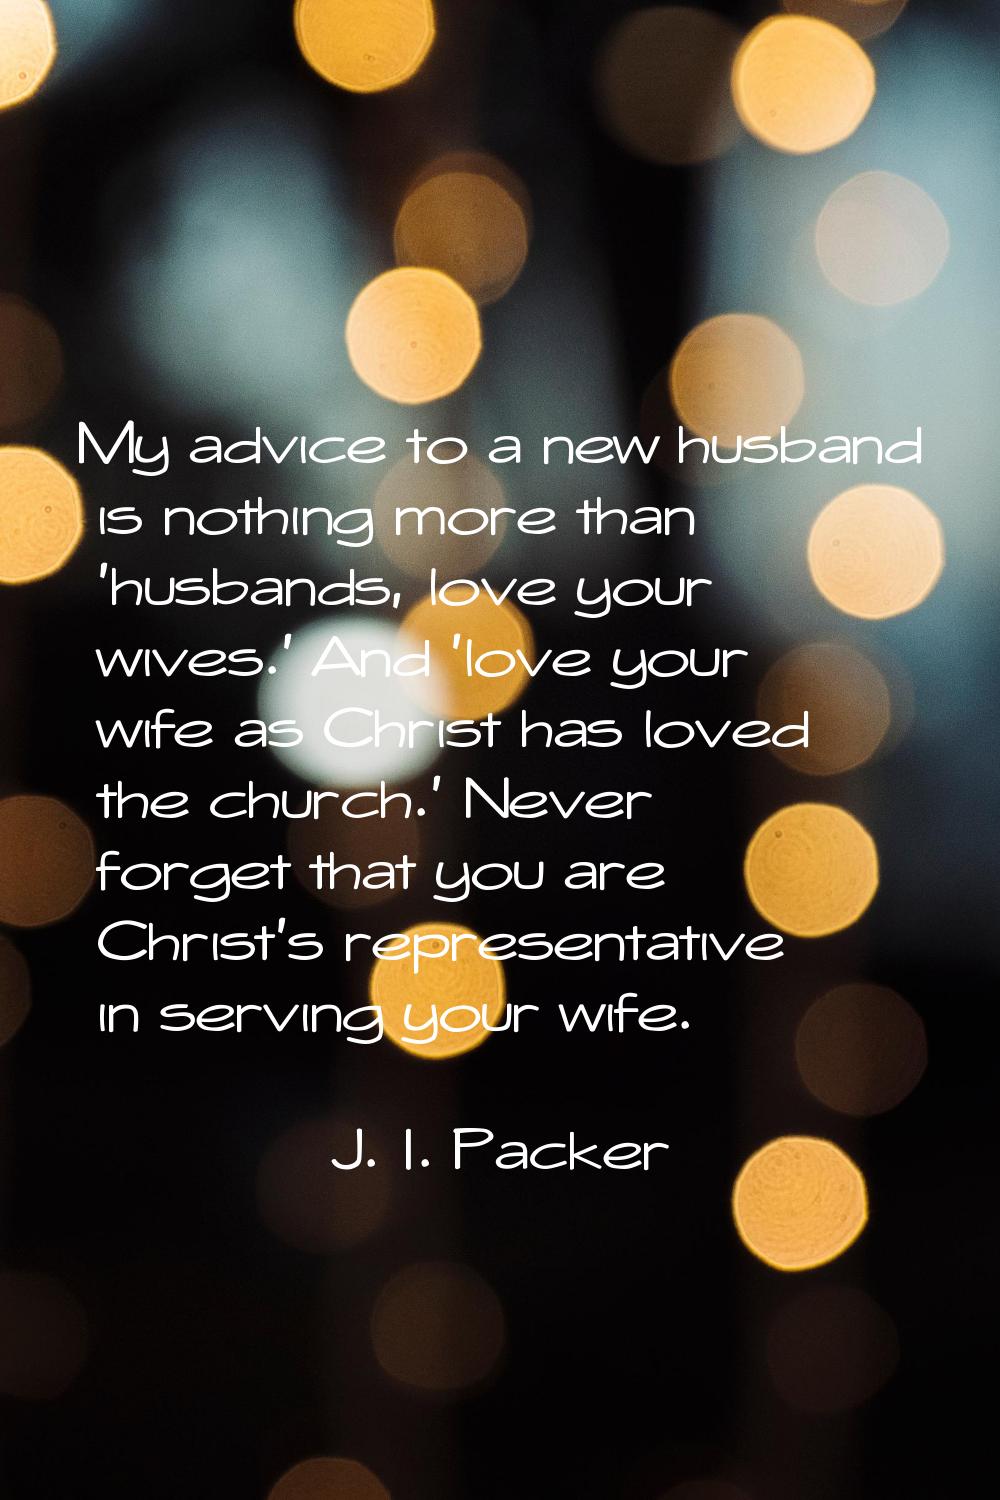 My advice to a new husband is nothing more than 'husbands, love your wives.' And 'love your wife as